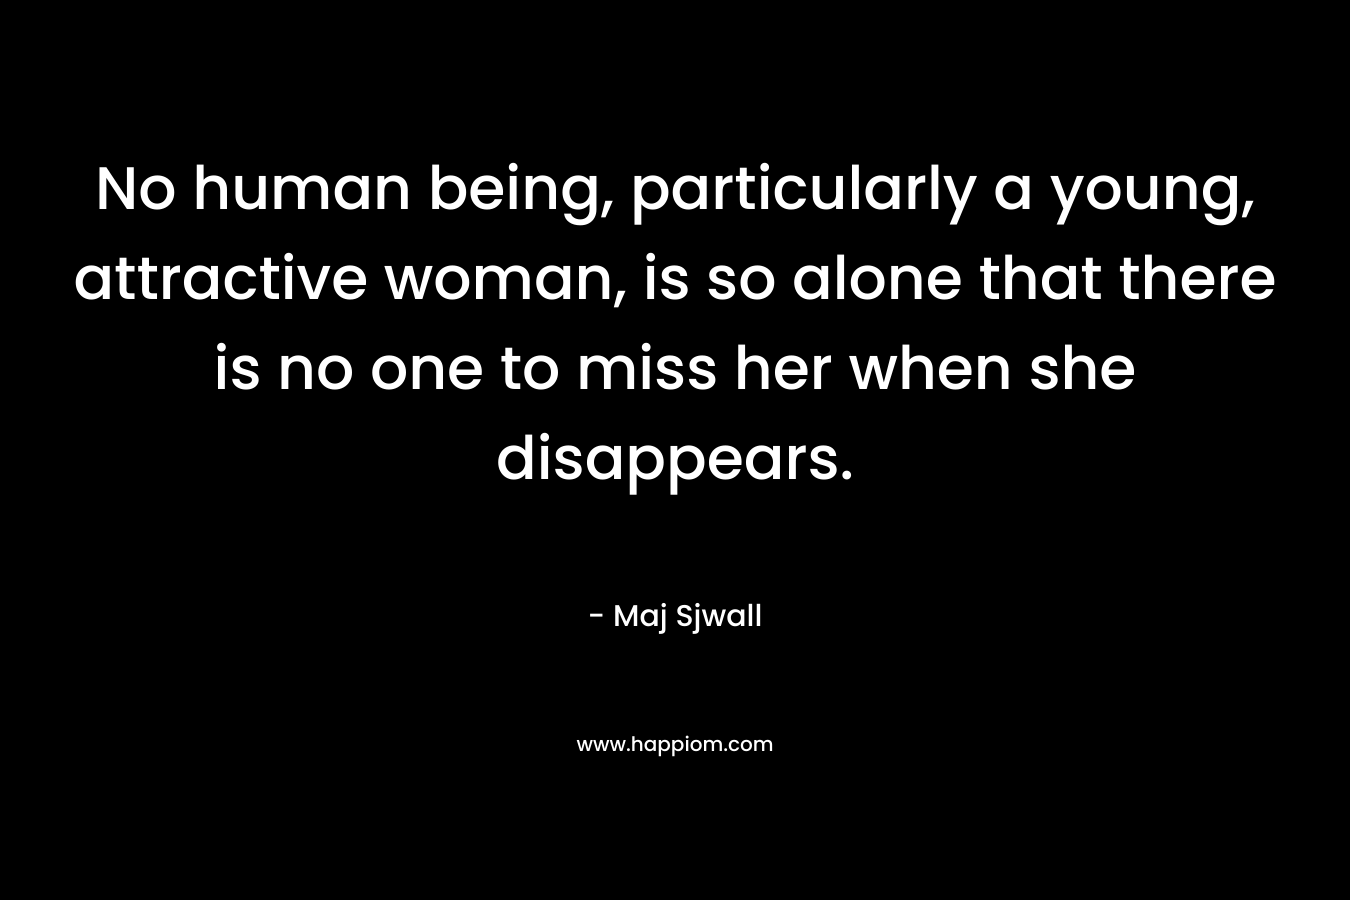 No human being, particularly a young, attractive woman, is so alone that there is no one to miss her when she disappears. – Maj Sjwall